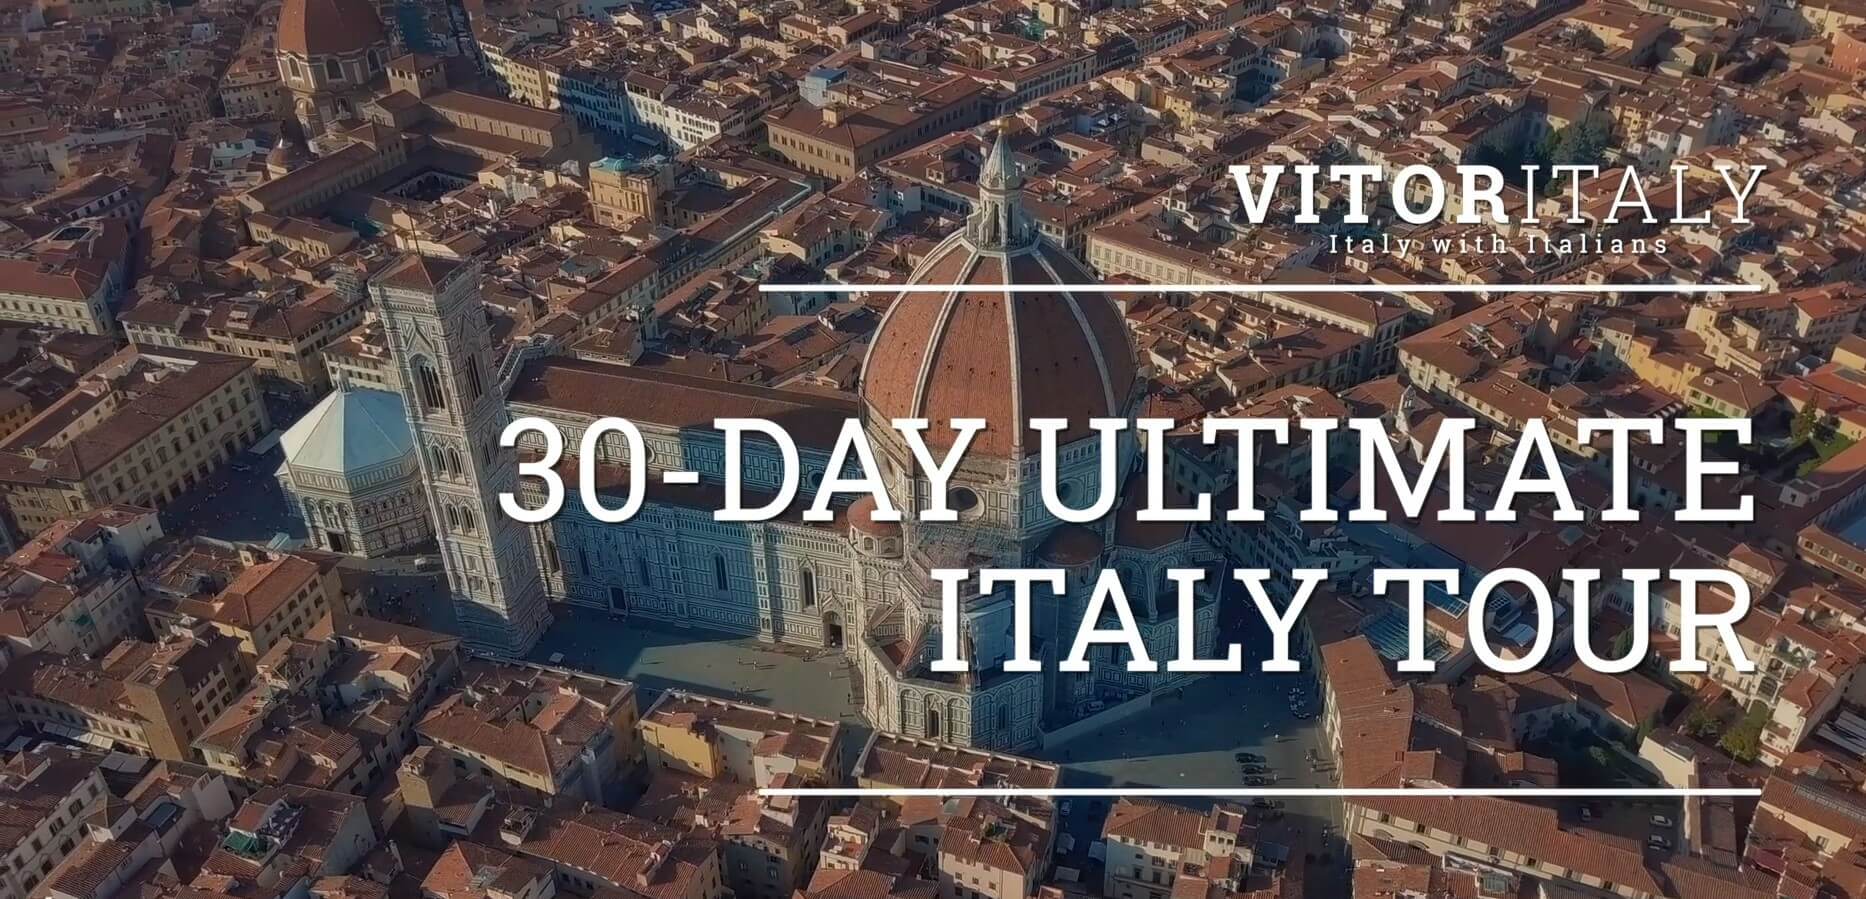 ULTIMATE ITALY TOUR - Italy in 30 Days